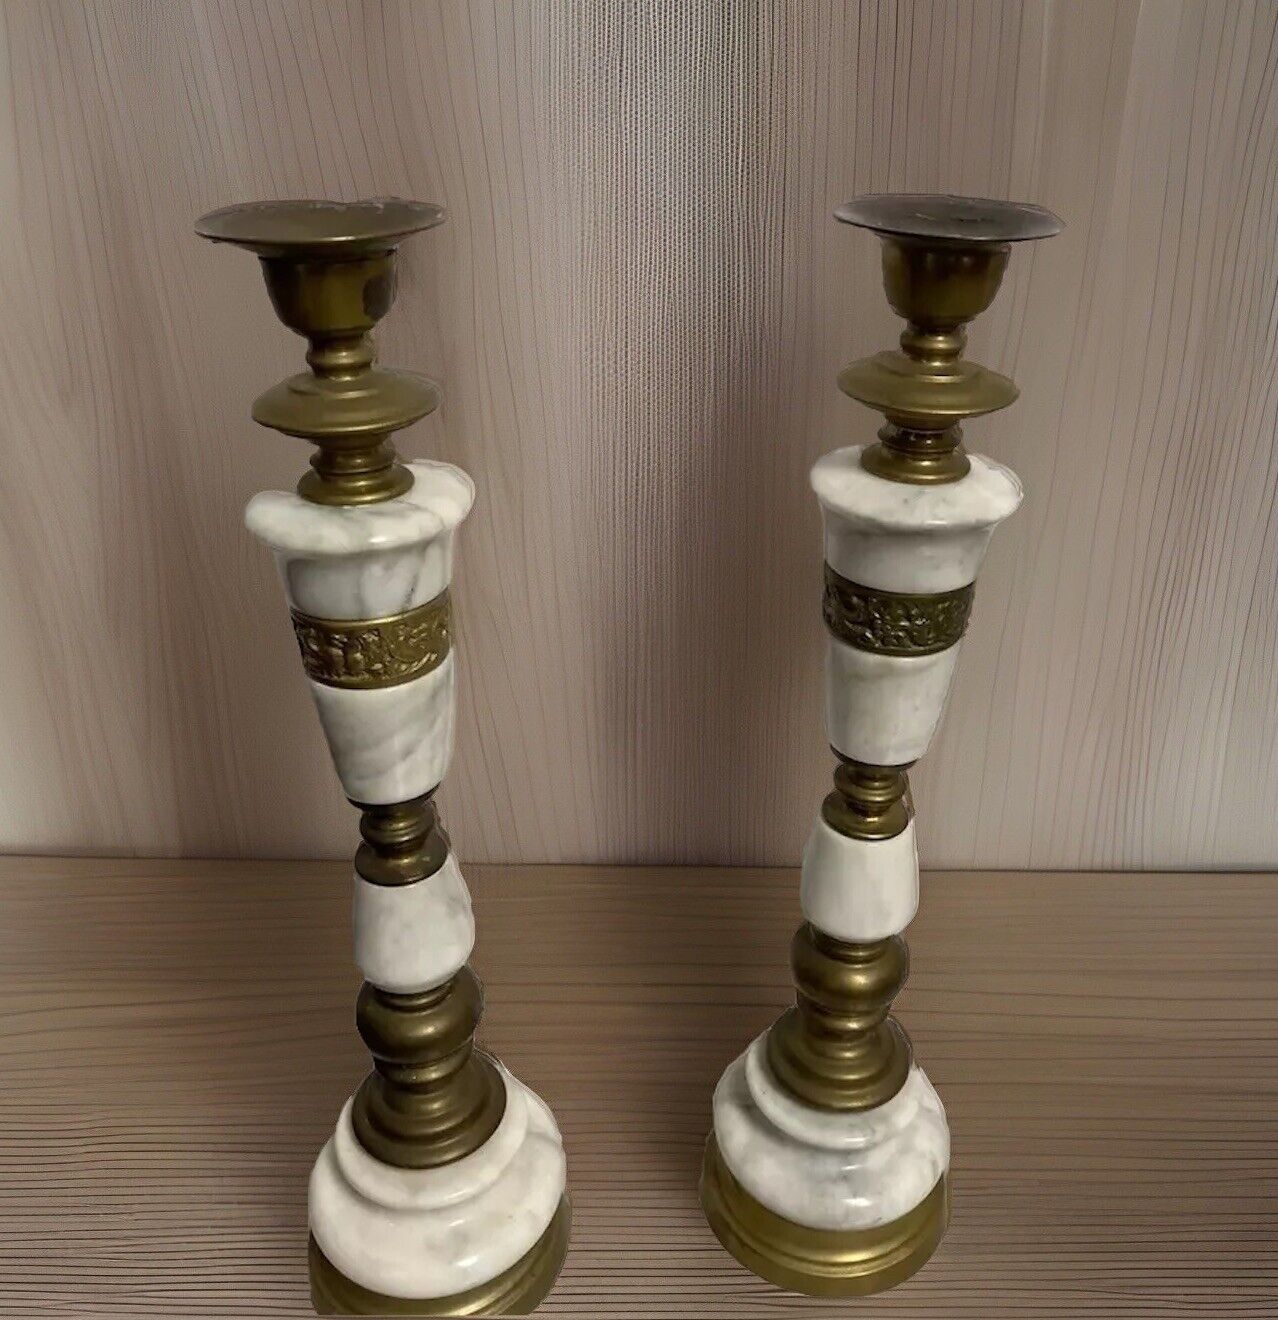 Vtg Pair Tall Brass & Marble Candle Holders 16 Inches Phenix Peacock Bird Motif